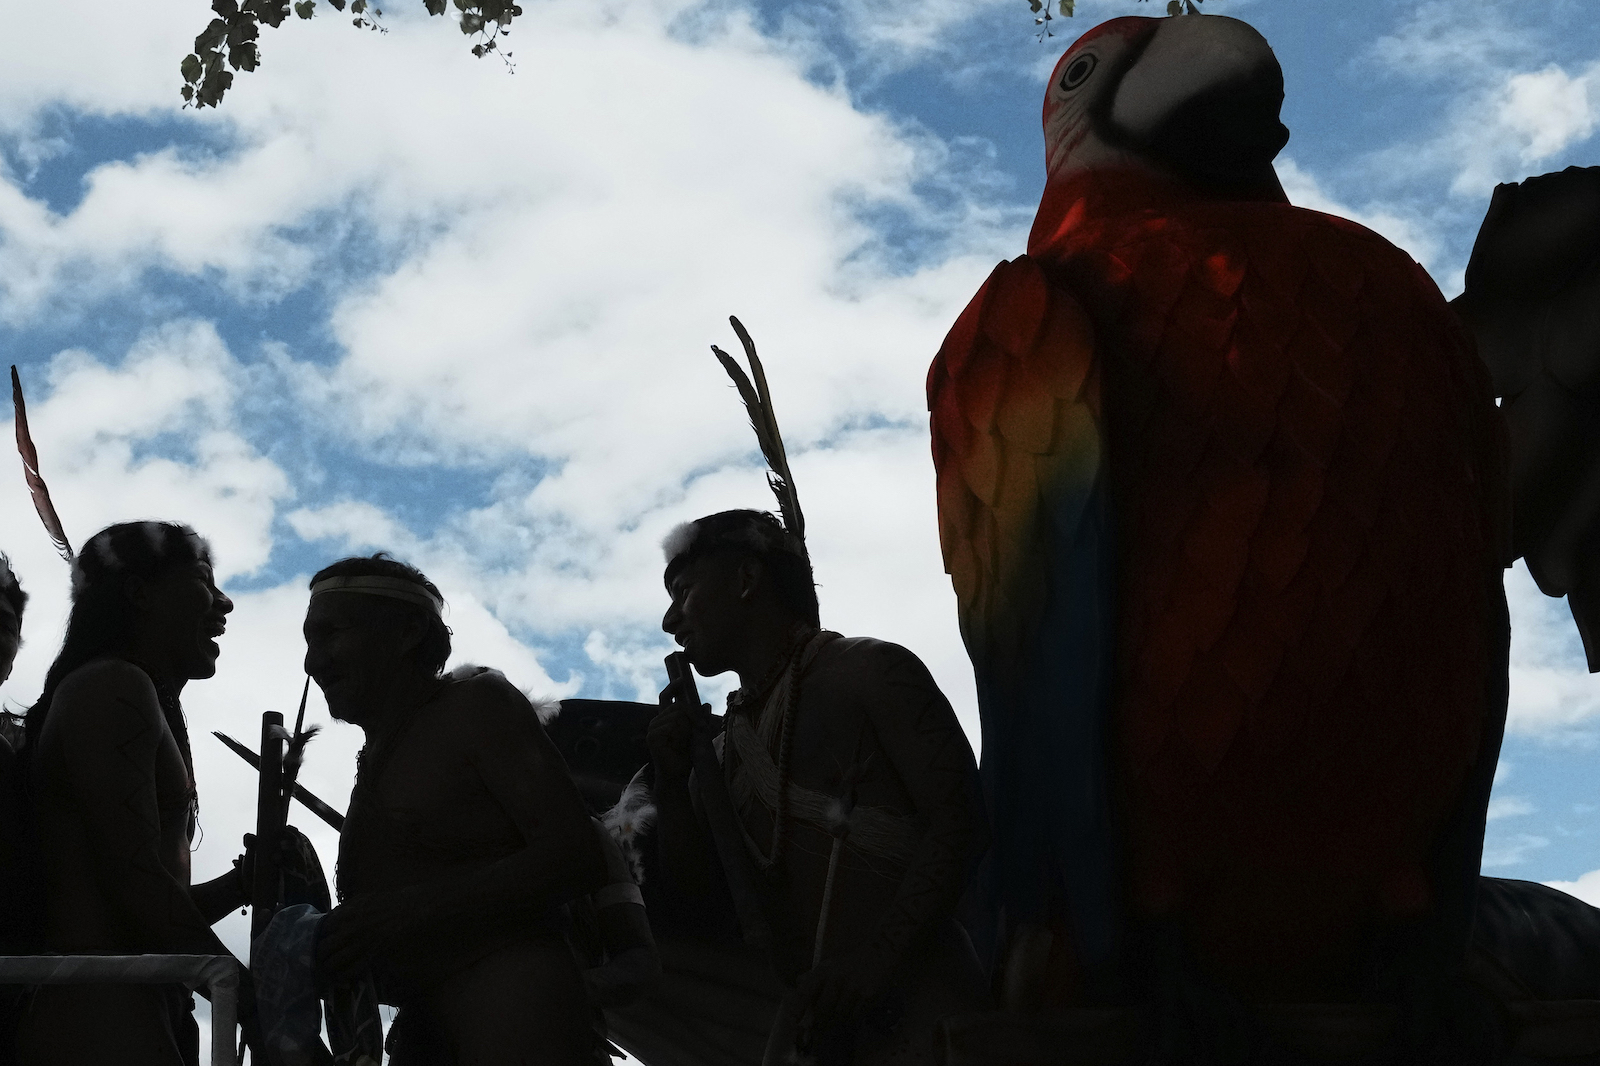 a group of people with tall headdresses silhouetted against blue sky and clouds